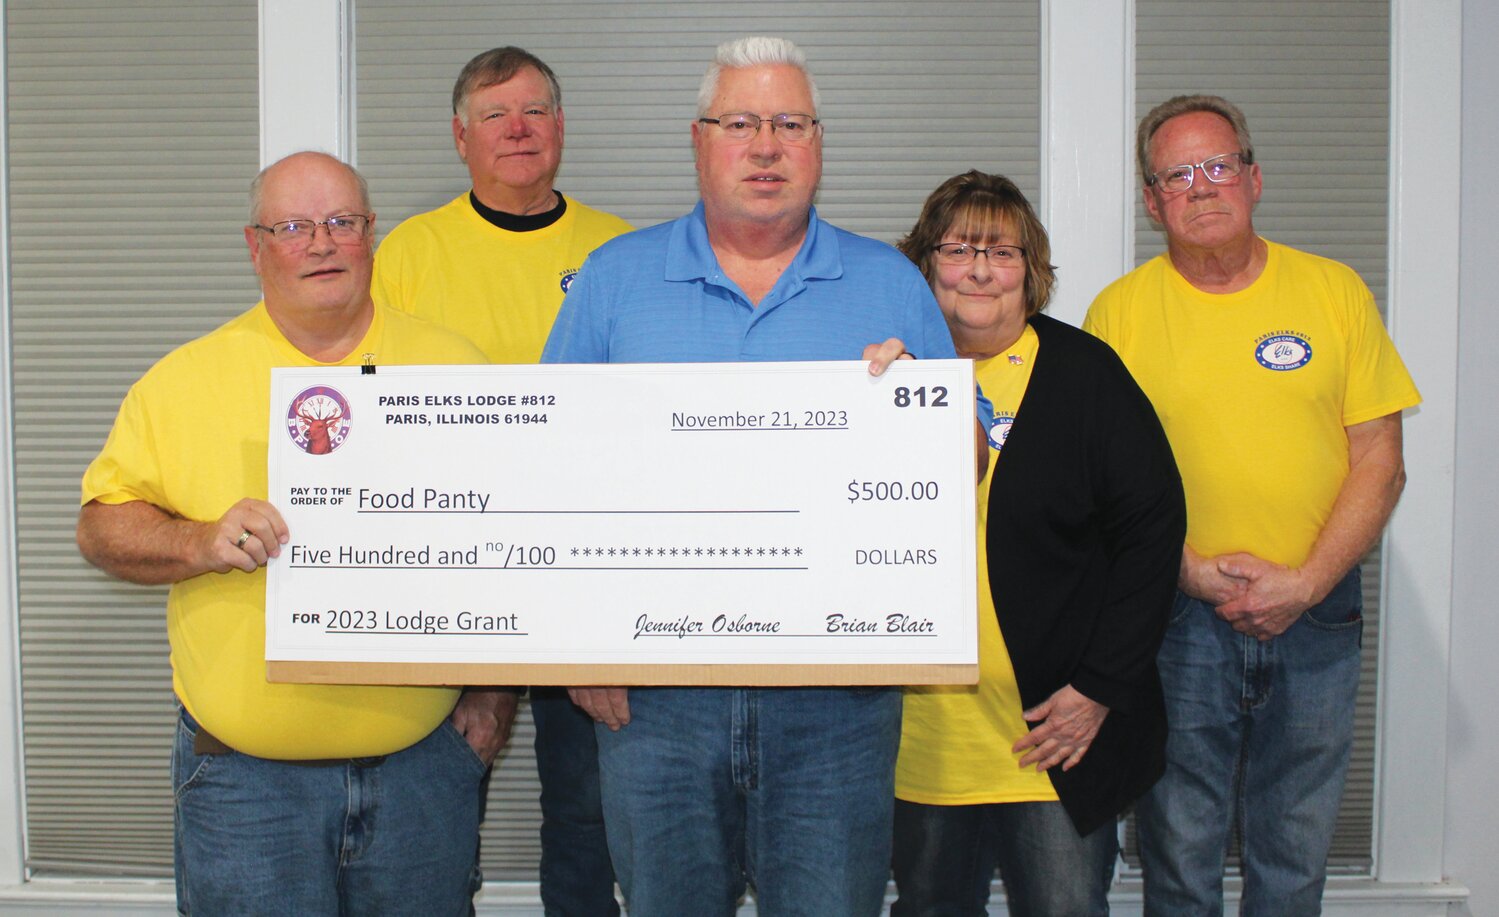 Glenn Strow (center) accepted a $500 donation on behalf of the Food Pantry from multiple members of the Paris Elks Lodge #812.